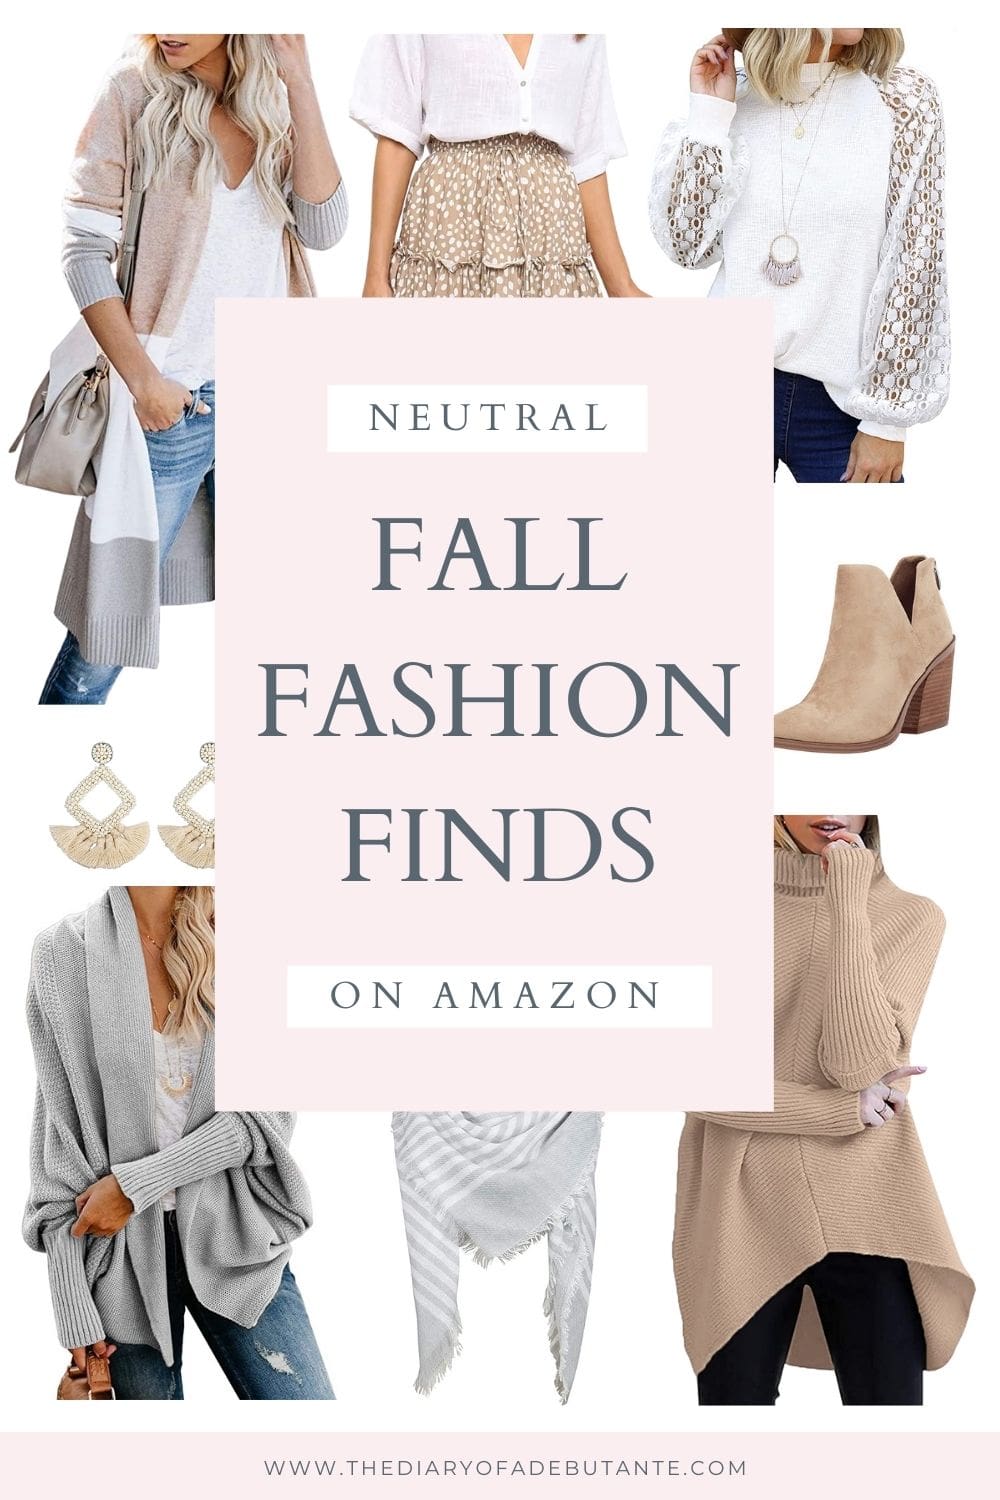 Affordable fashion blogger Stephanie Ziajka shares her favorite neutral fall fashion finds on Amazon on Diary of a Debutante